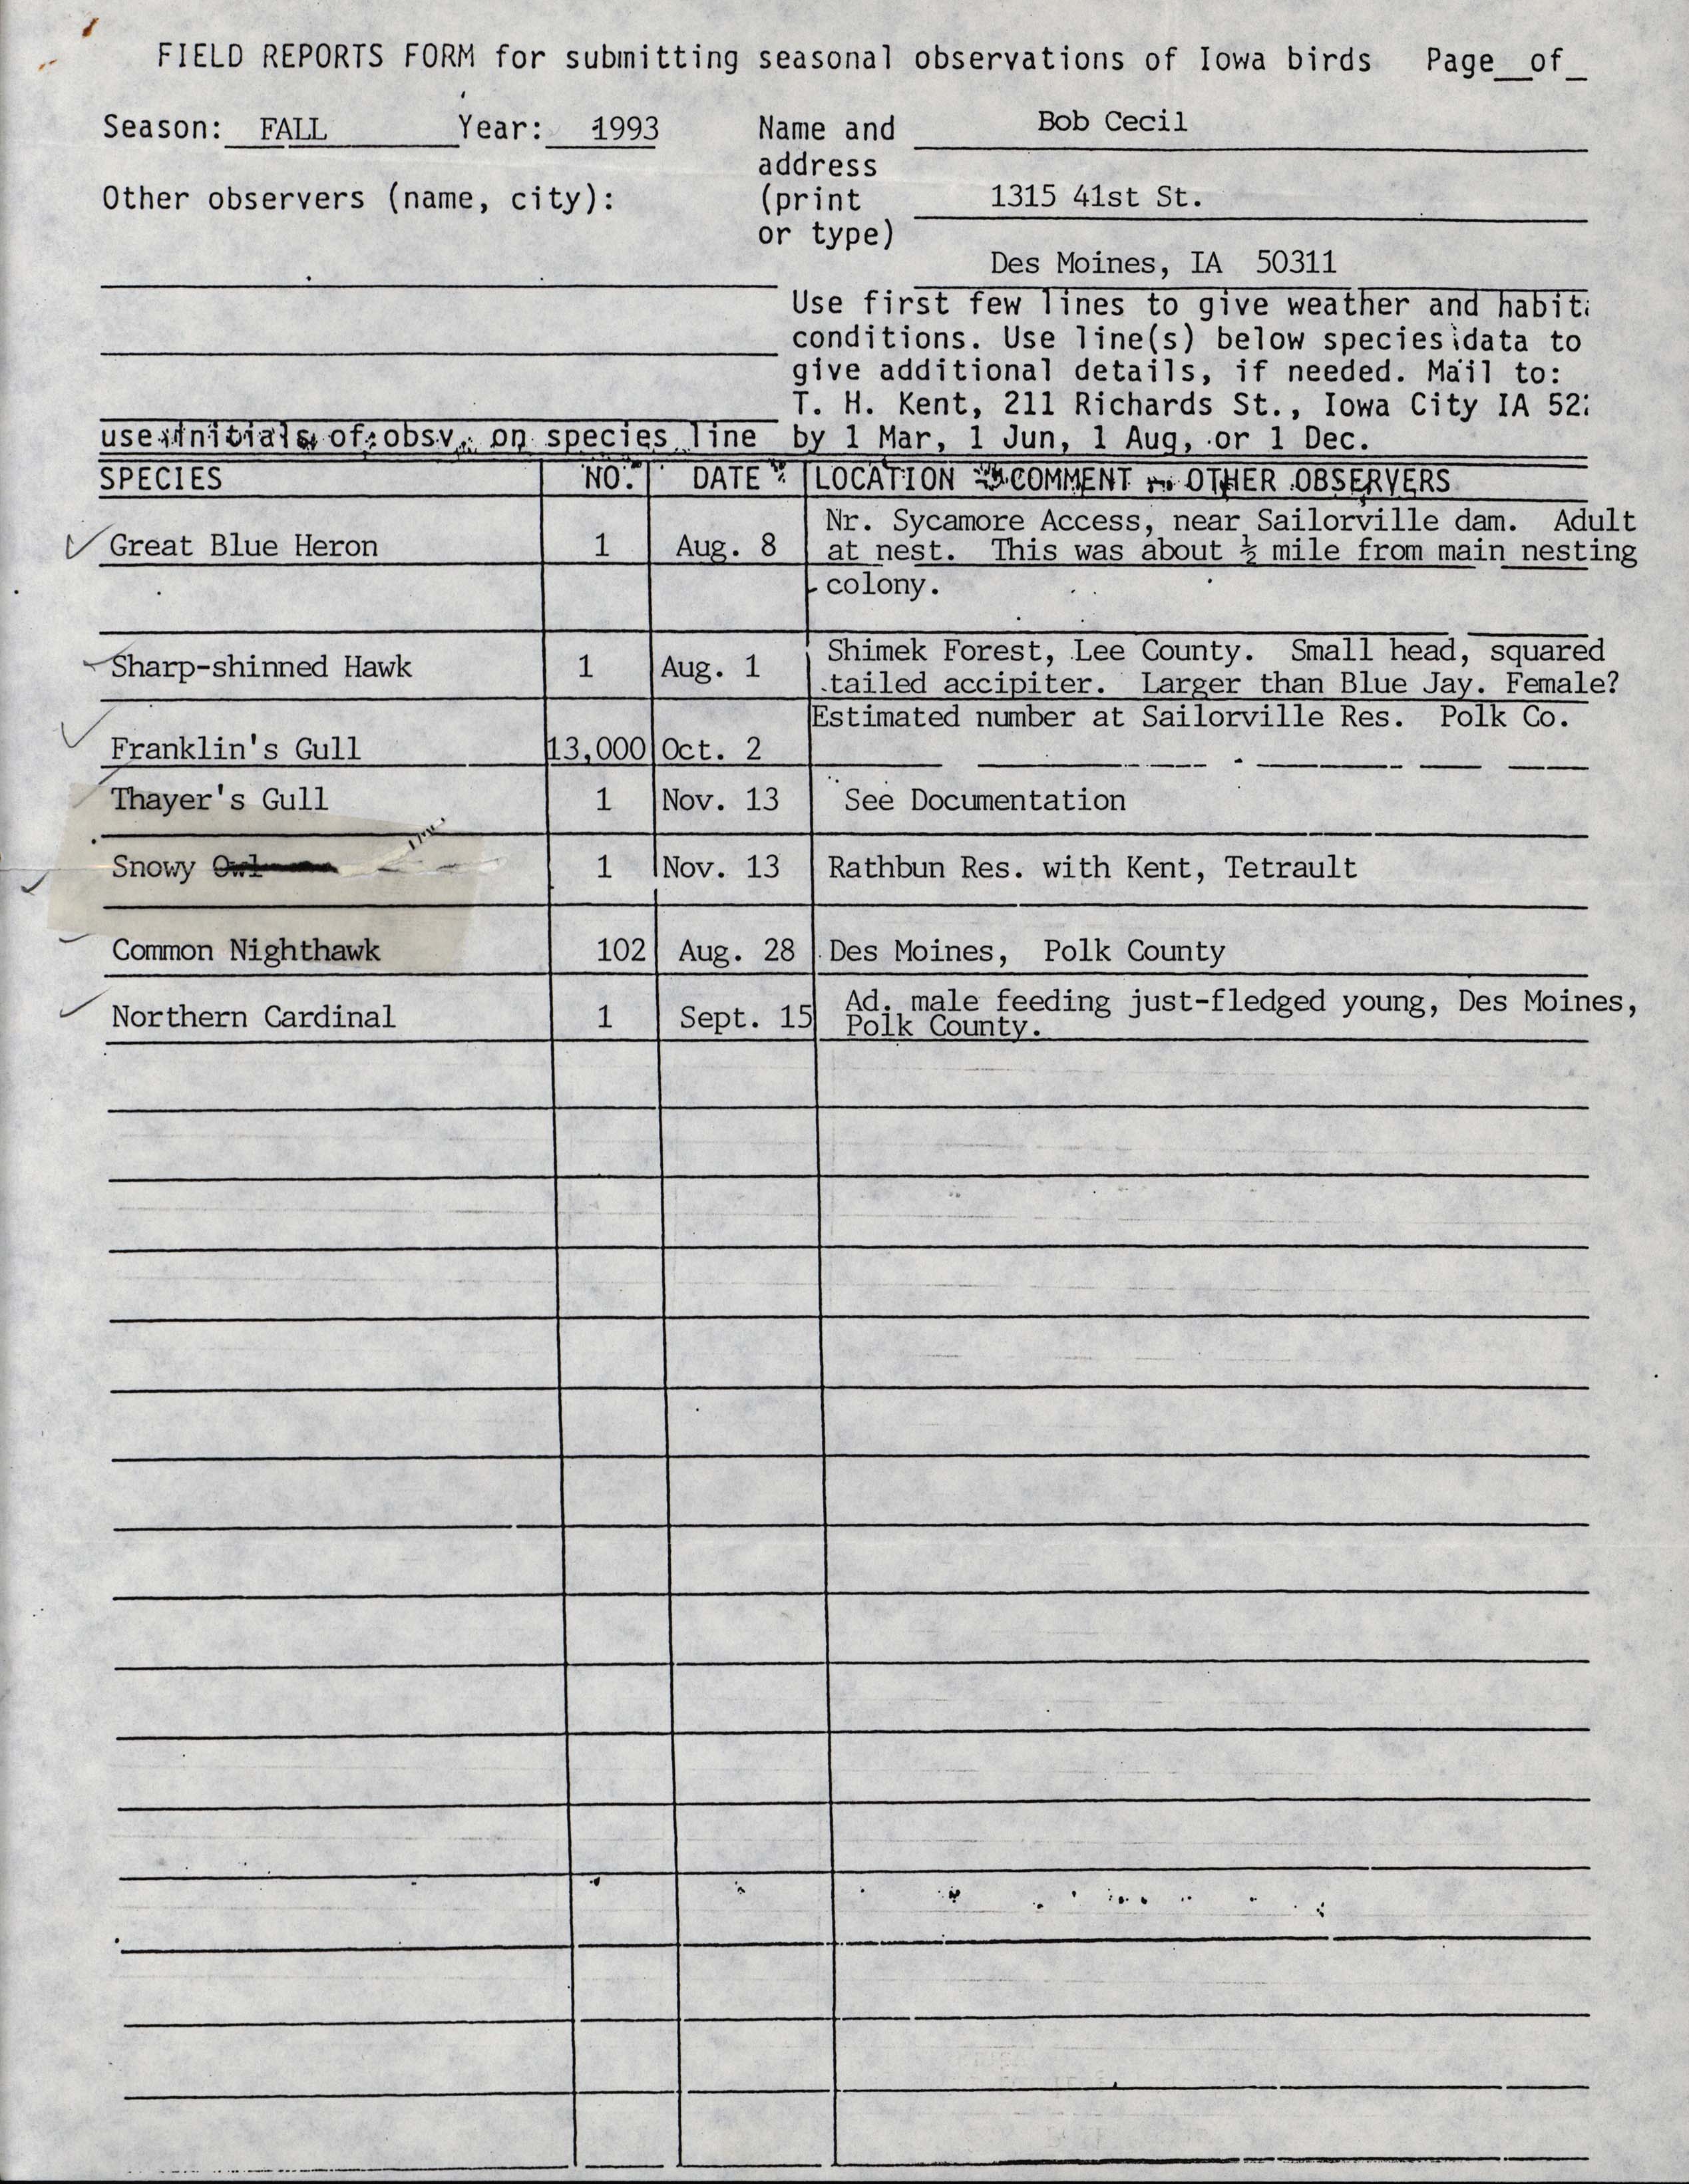 Field reports form for submitting seasonal observations of Iowa birds, Robert I. Cecil, fall 1993